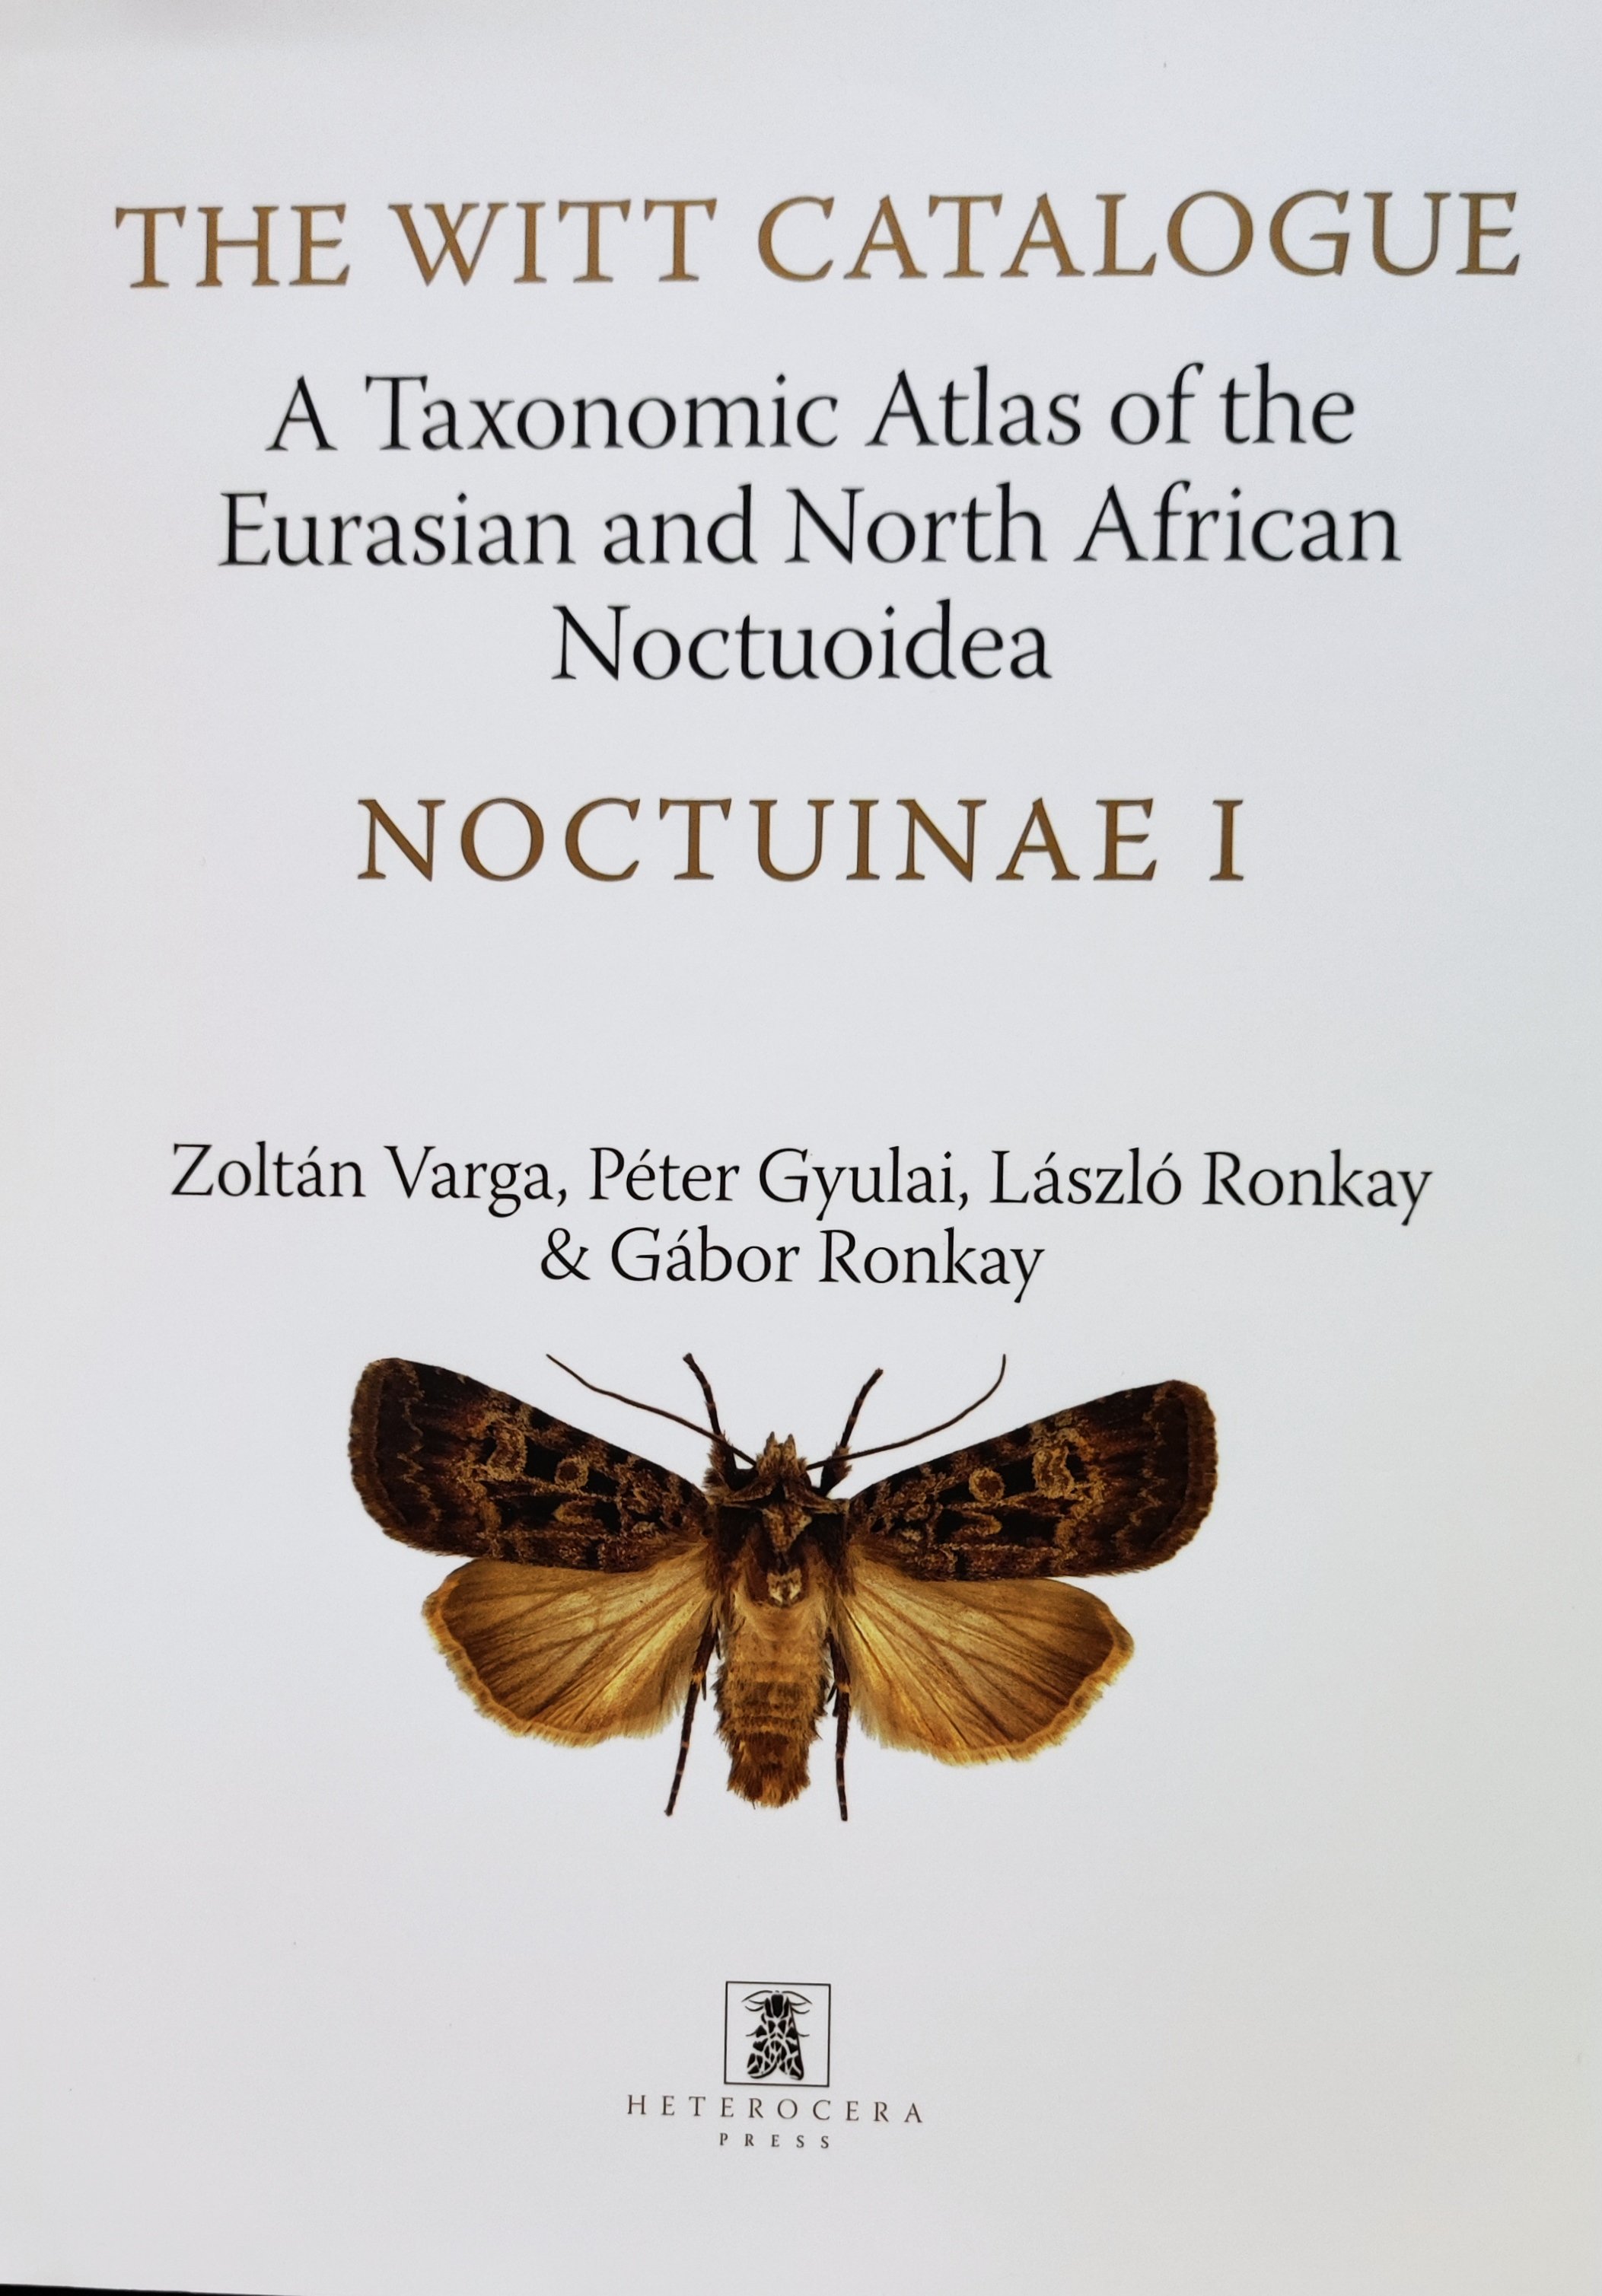 The Witt Catalogue: A Taxonomic Atlas of the Eurasian and North African Noctuoidea. volume 6. - Noctuinae 1. (Rippl-Rónai Múzeum CC BY-NC-ND)